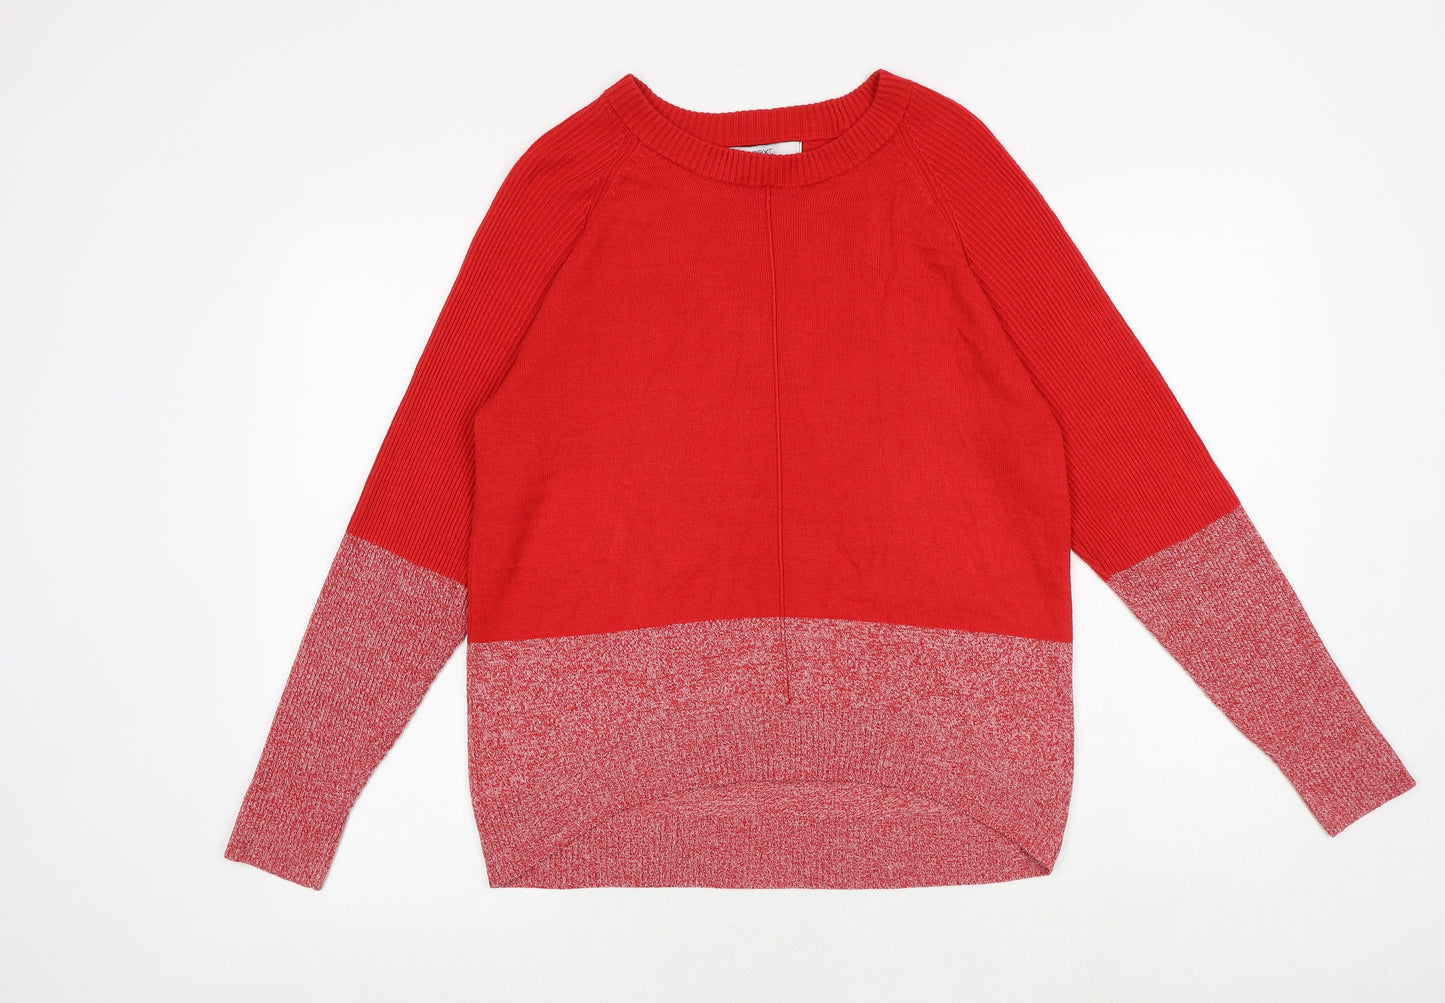 NEXT Womens Red Round Neck Acrylic Pullover Jumper Size S